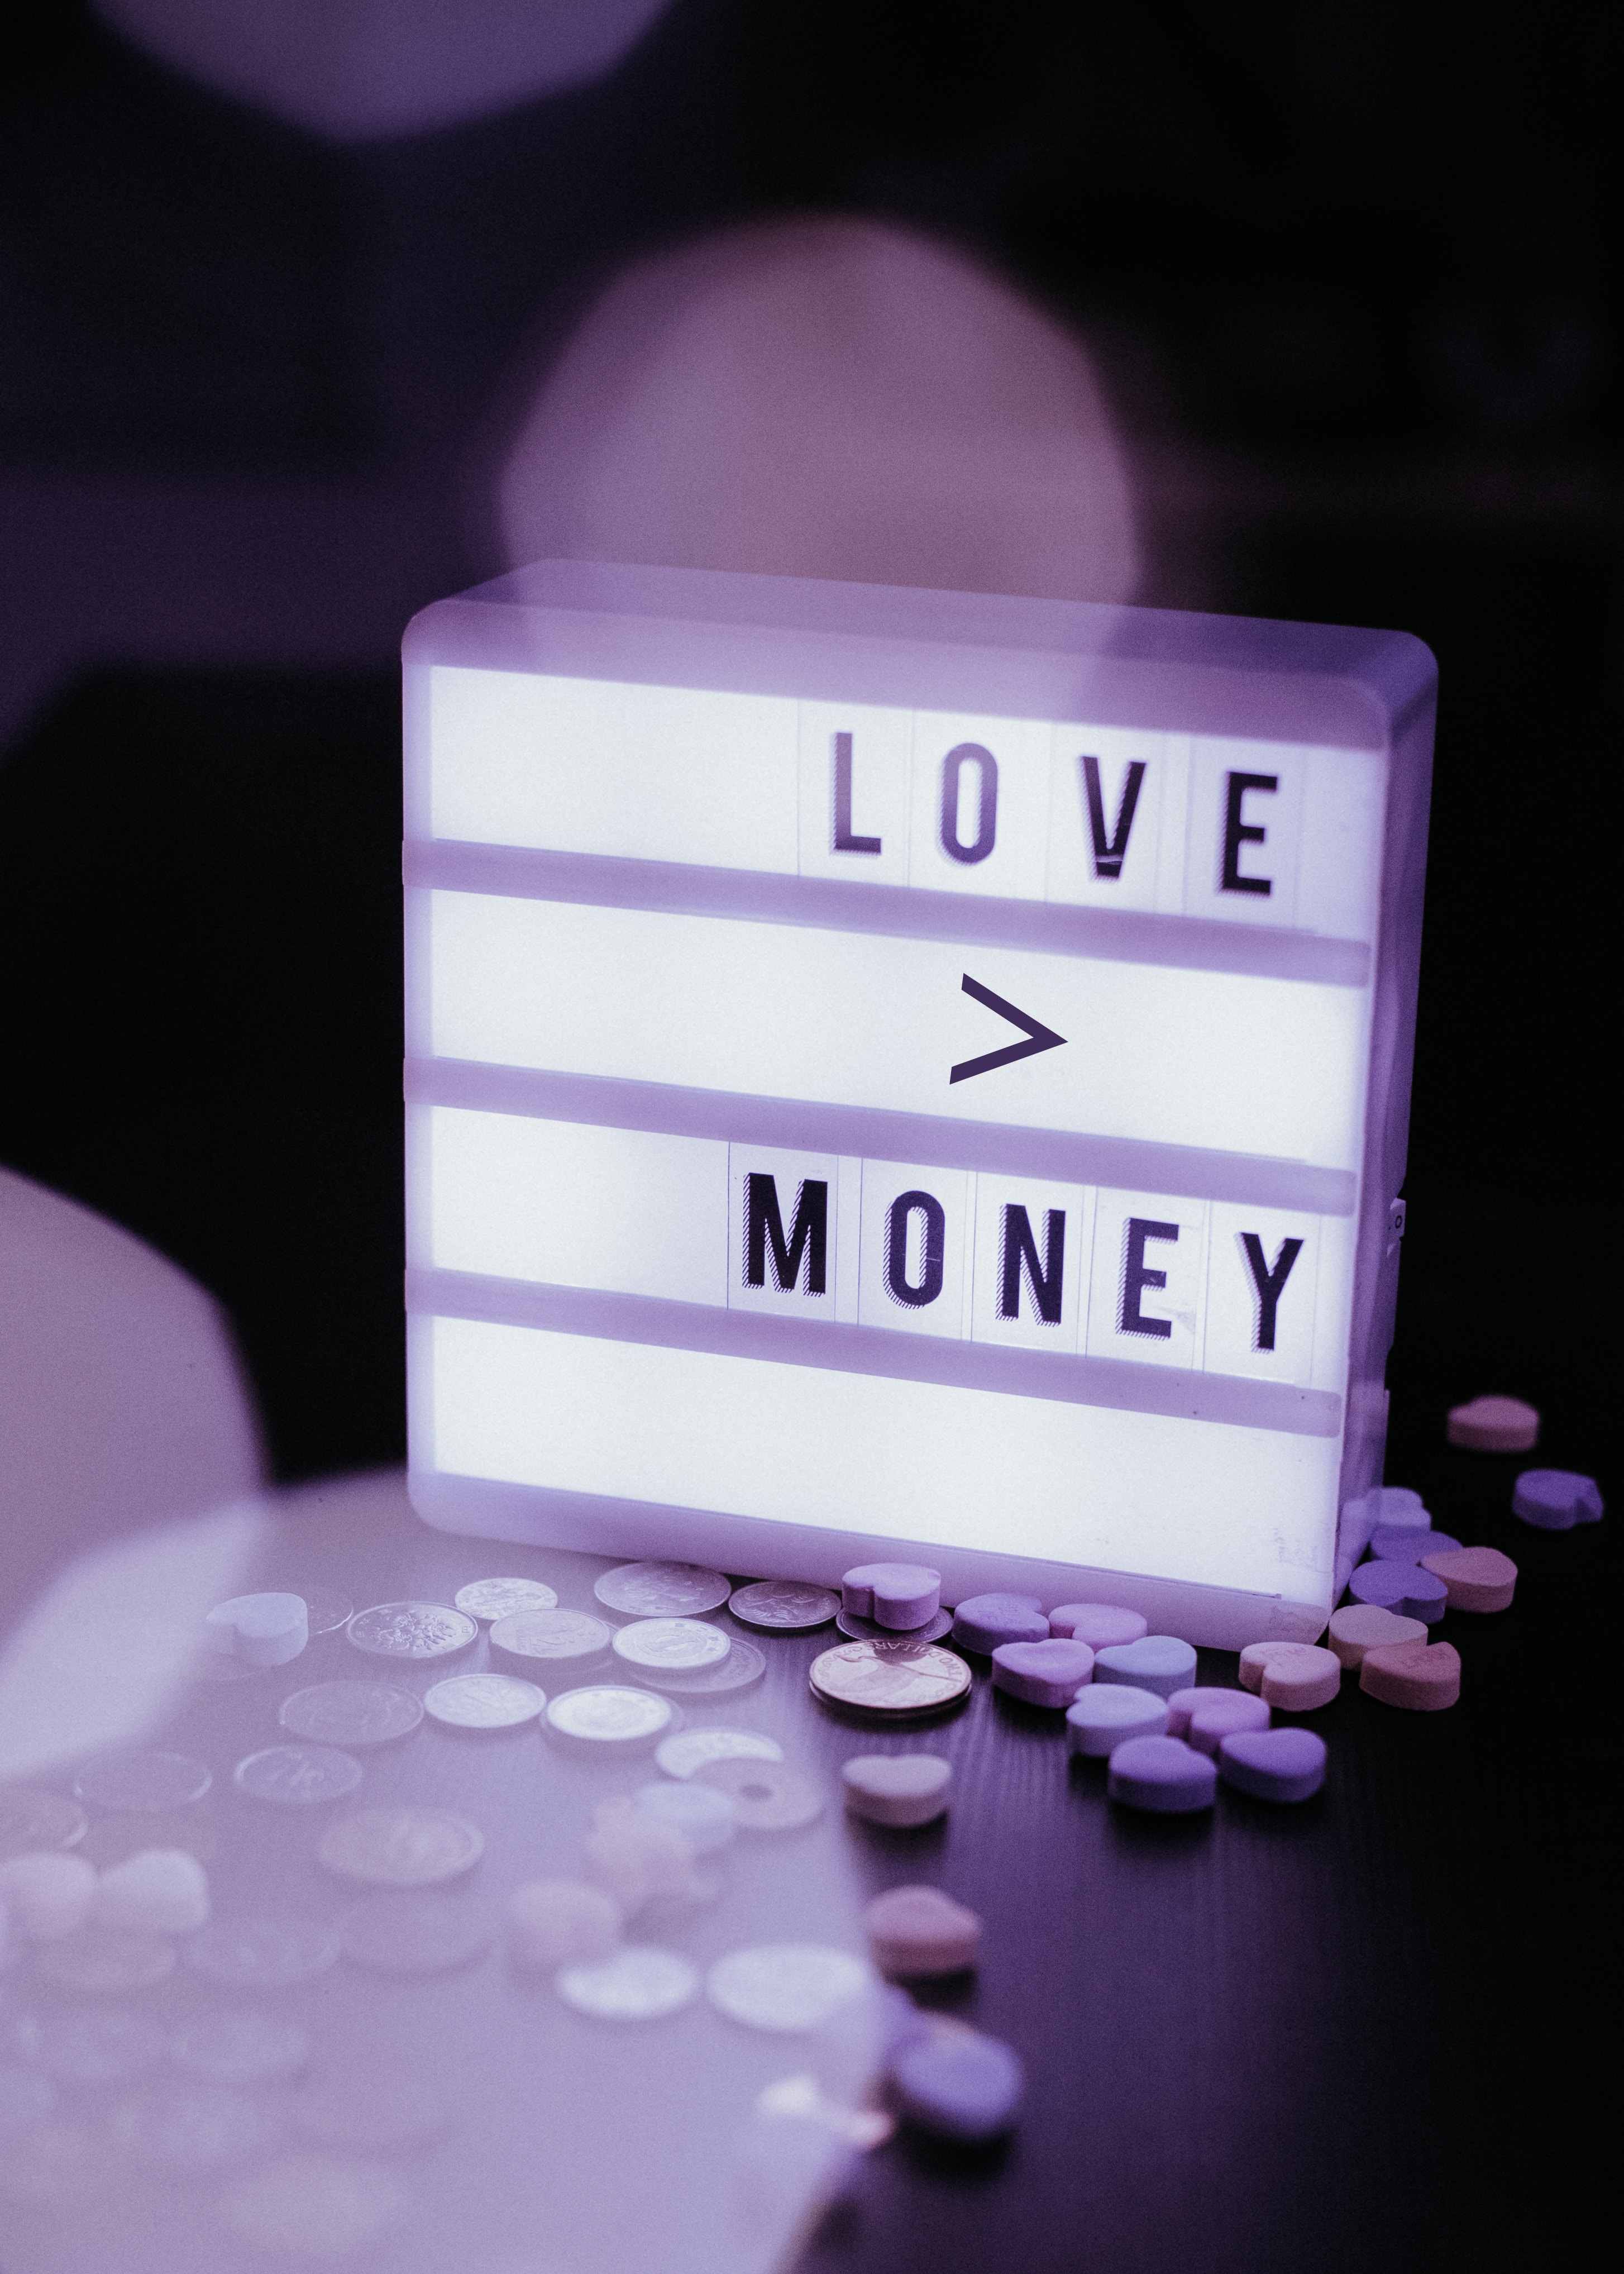 android money, plate, nameplate, shine, love, words, light